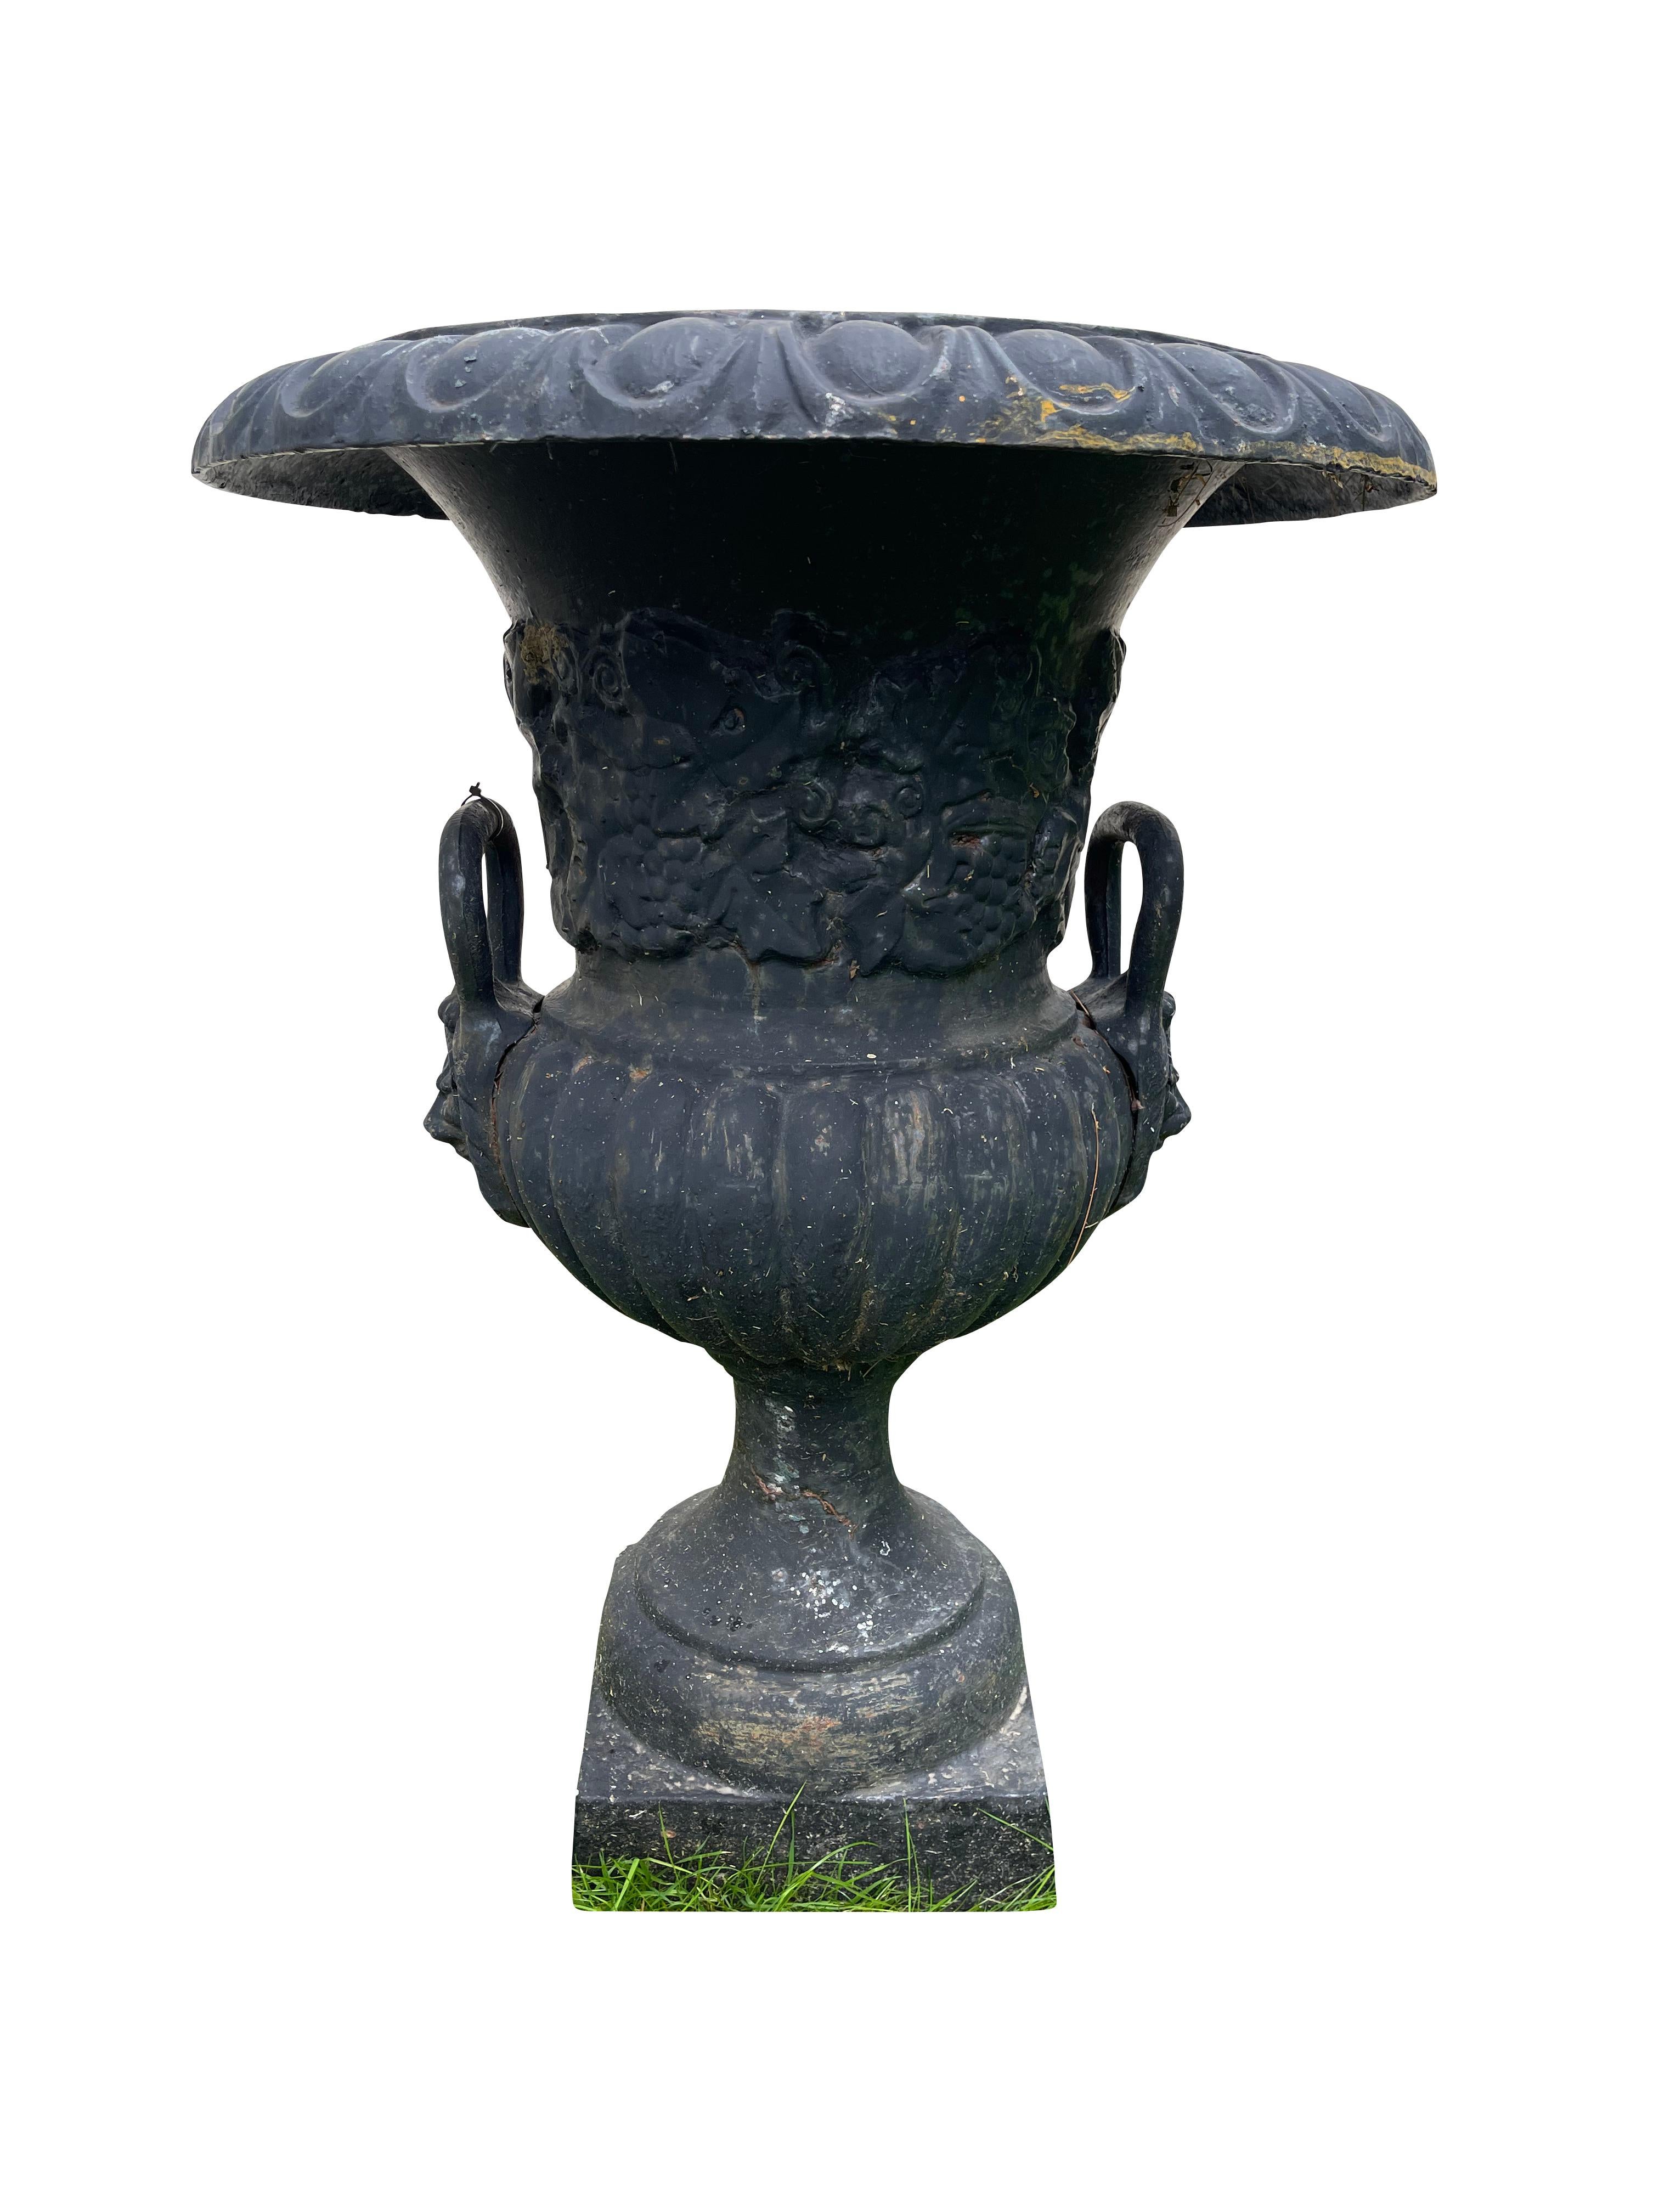 Pair of Black Neoclassical Garden Urns with Lion Mask Decoration In Good Condition For Sale In Essex, MA